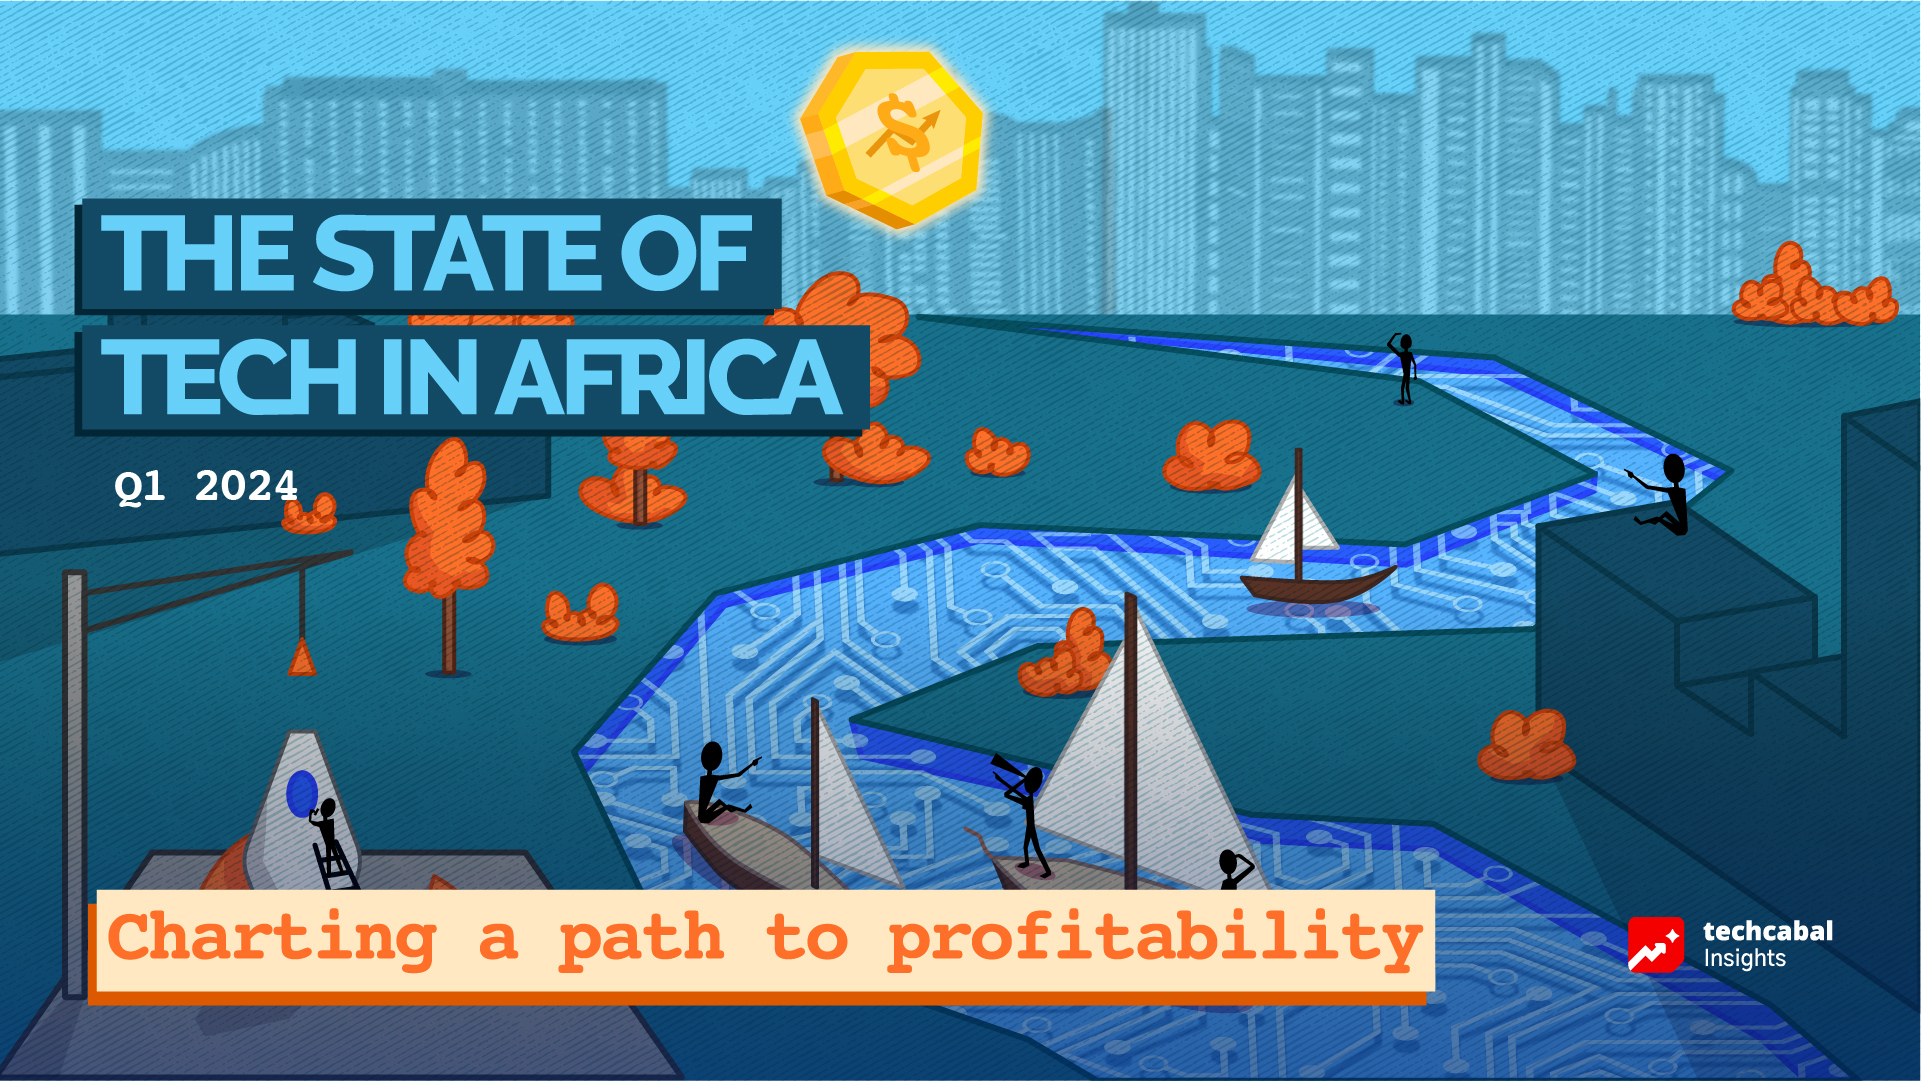 “African VCs are rethinking their investment strategies” and other things we learned at the launch of the State of Tech in Africa Report